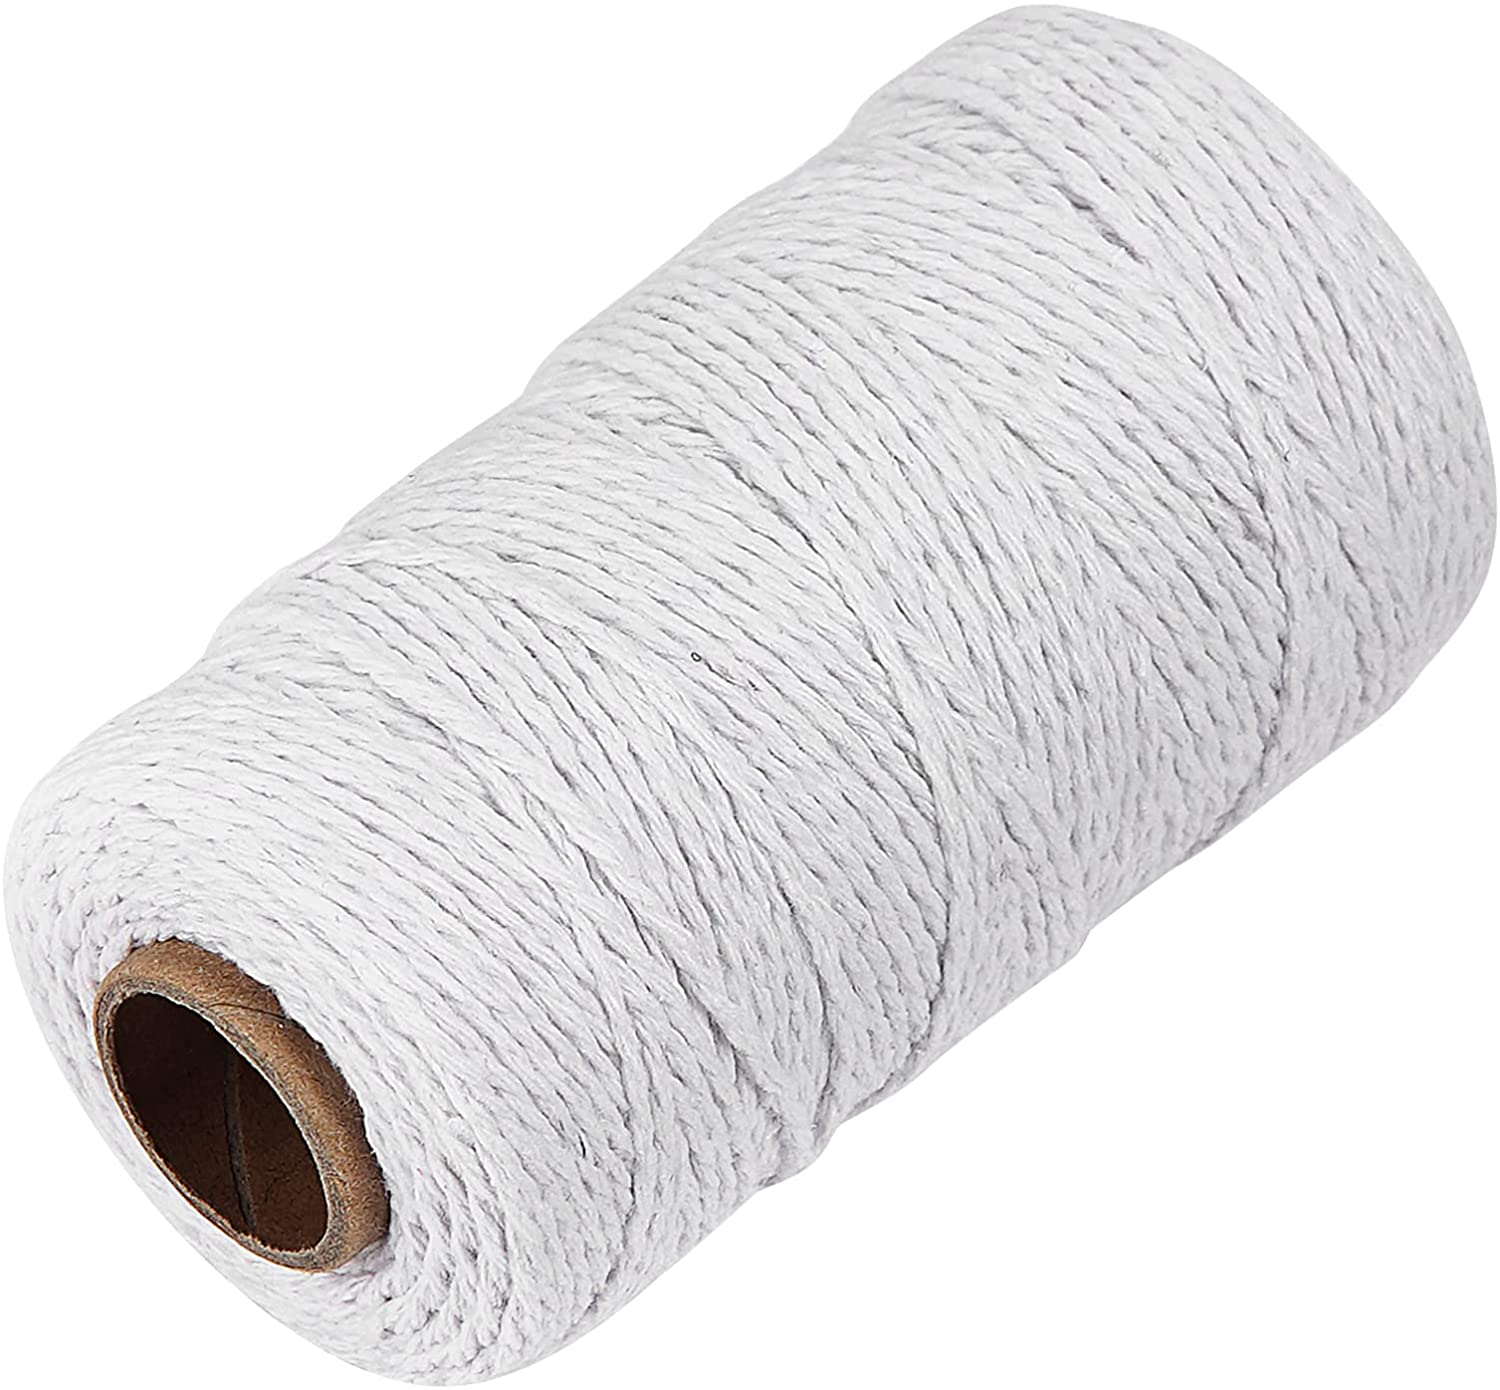 Black Cotton Butchers Twine String - Ohtomber 328 Feet 2MM Twine for  Crafts, Bakers Twine, Kitchen Cooking Butcher String for Meat and Roasting,  Gift